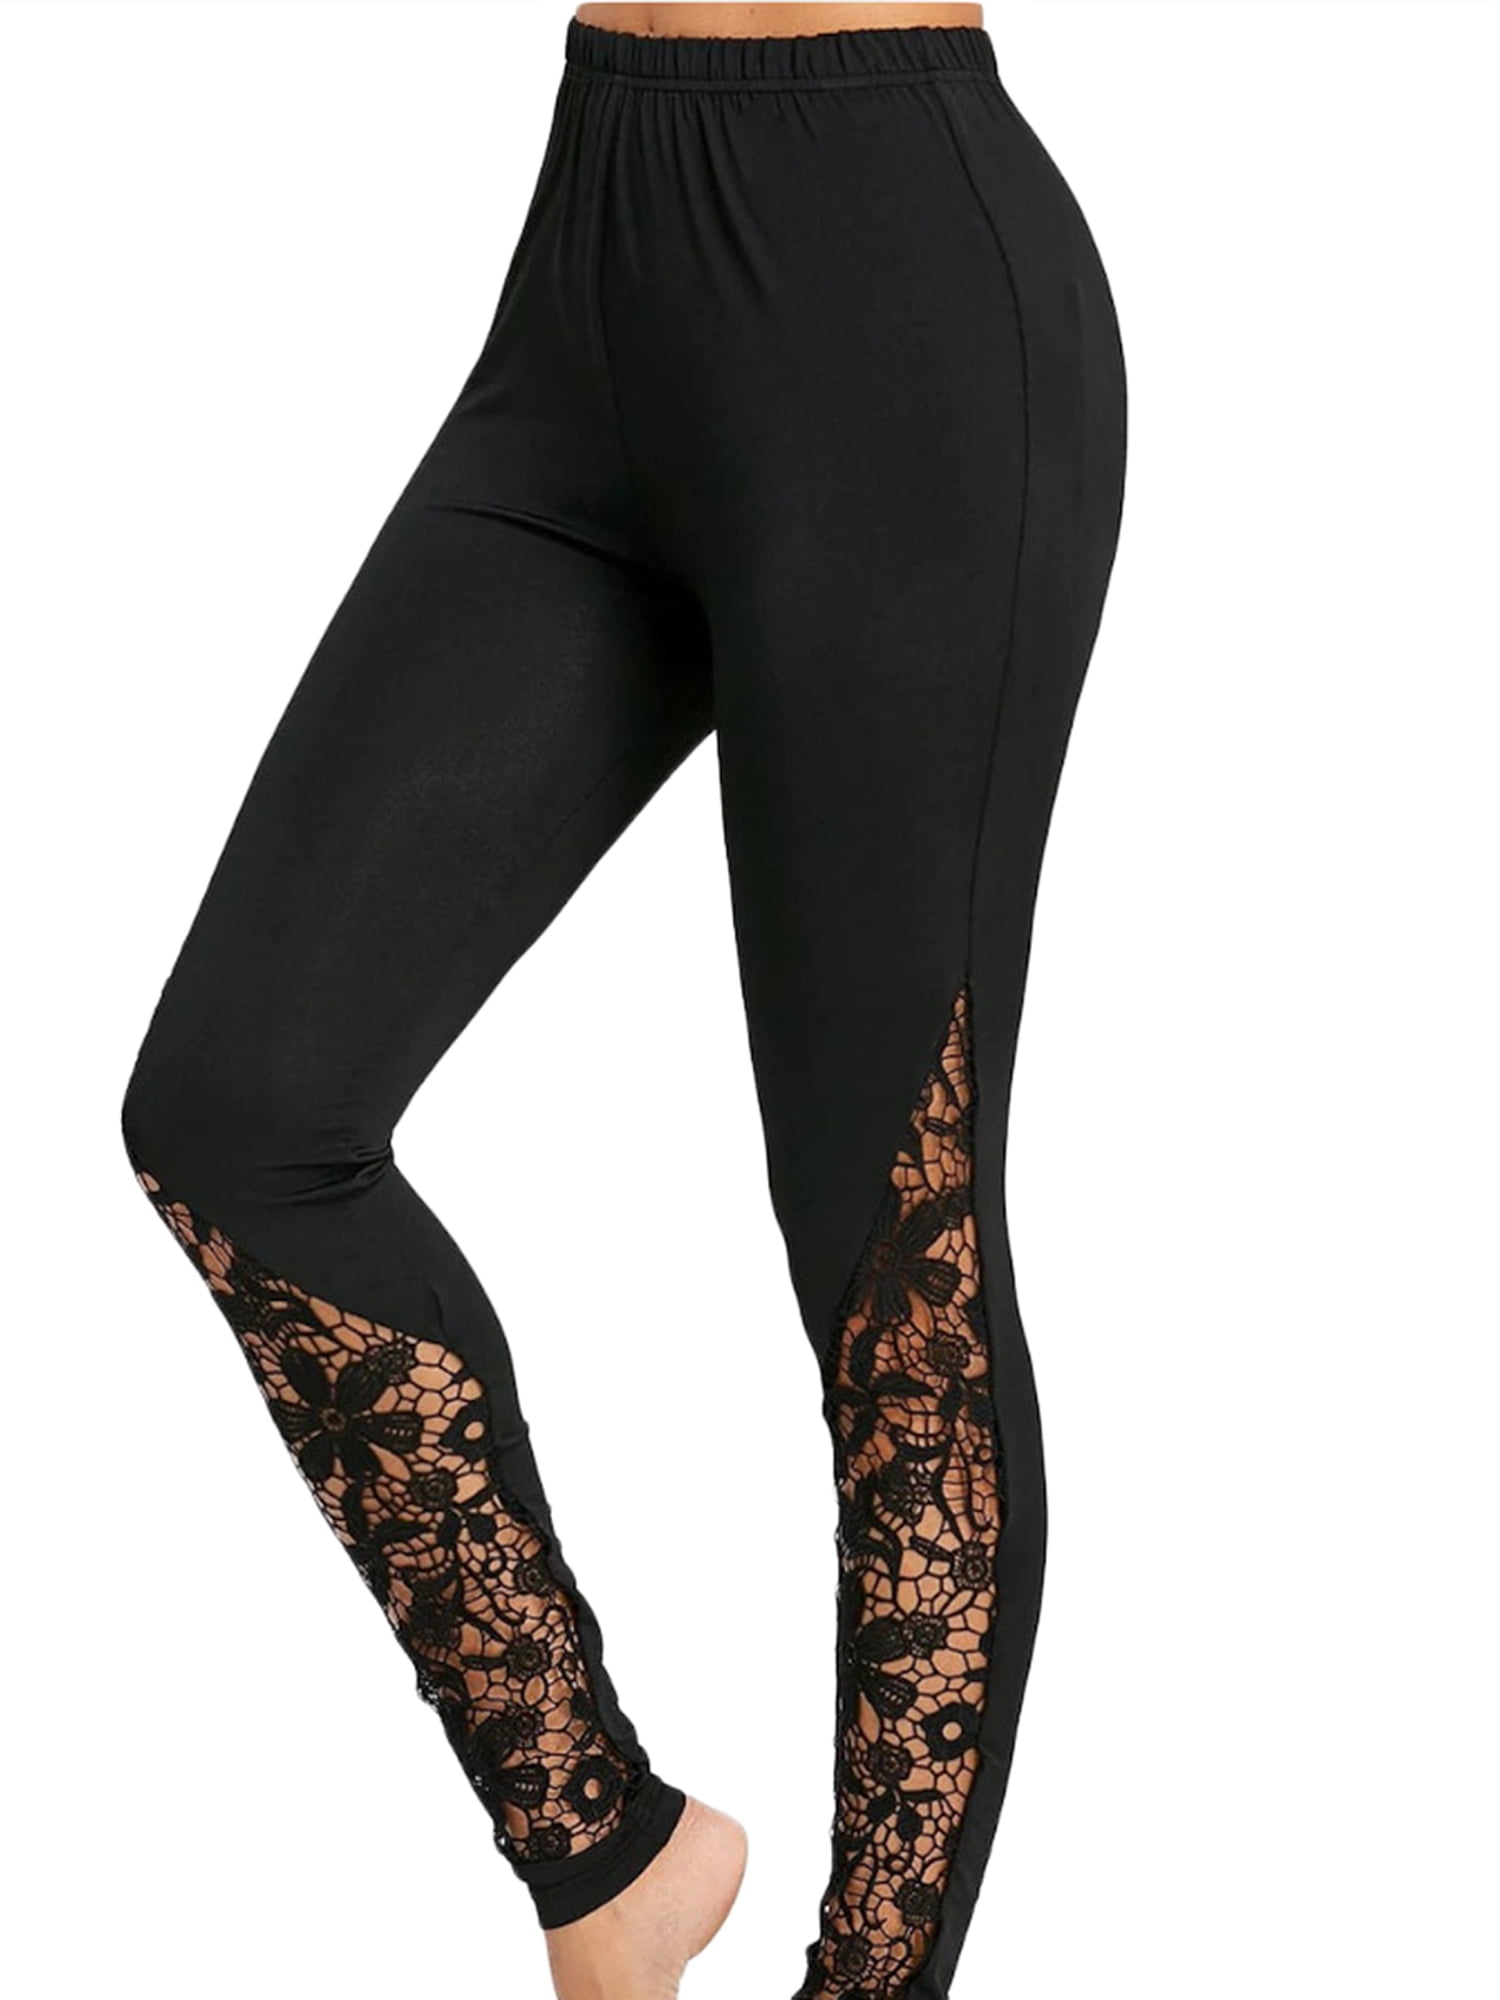 Women's Sheer Mesh Lace Hollow Leggings Stretchy High Waist Casual Pencil  Pants Lightweight Skinny Cutout Tights 